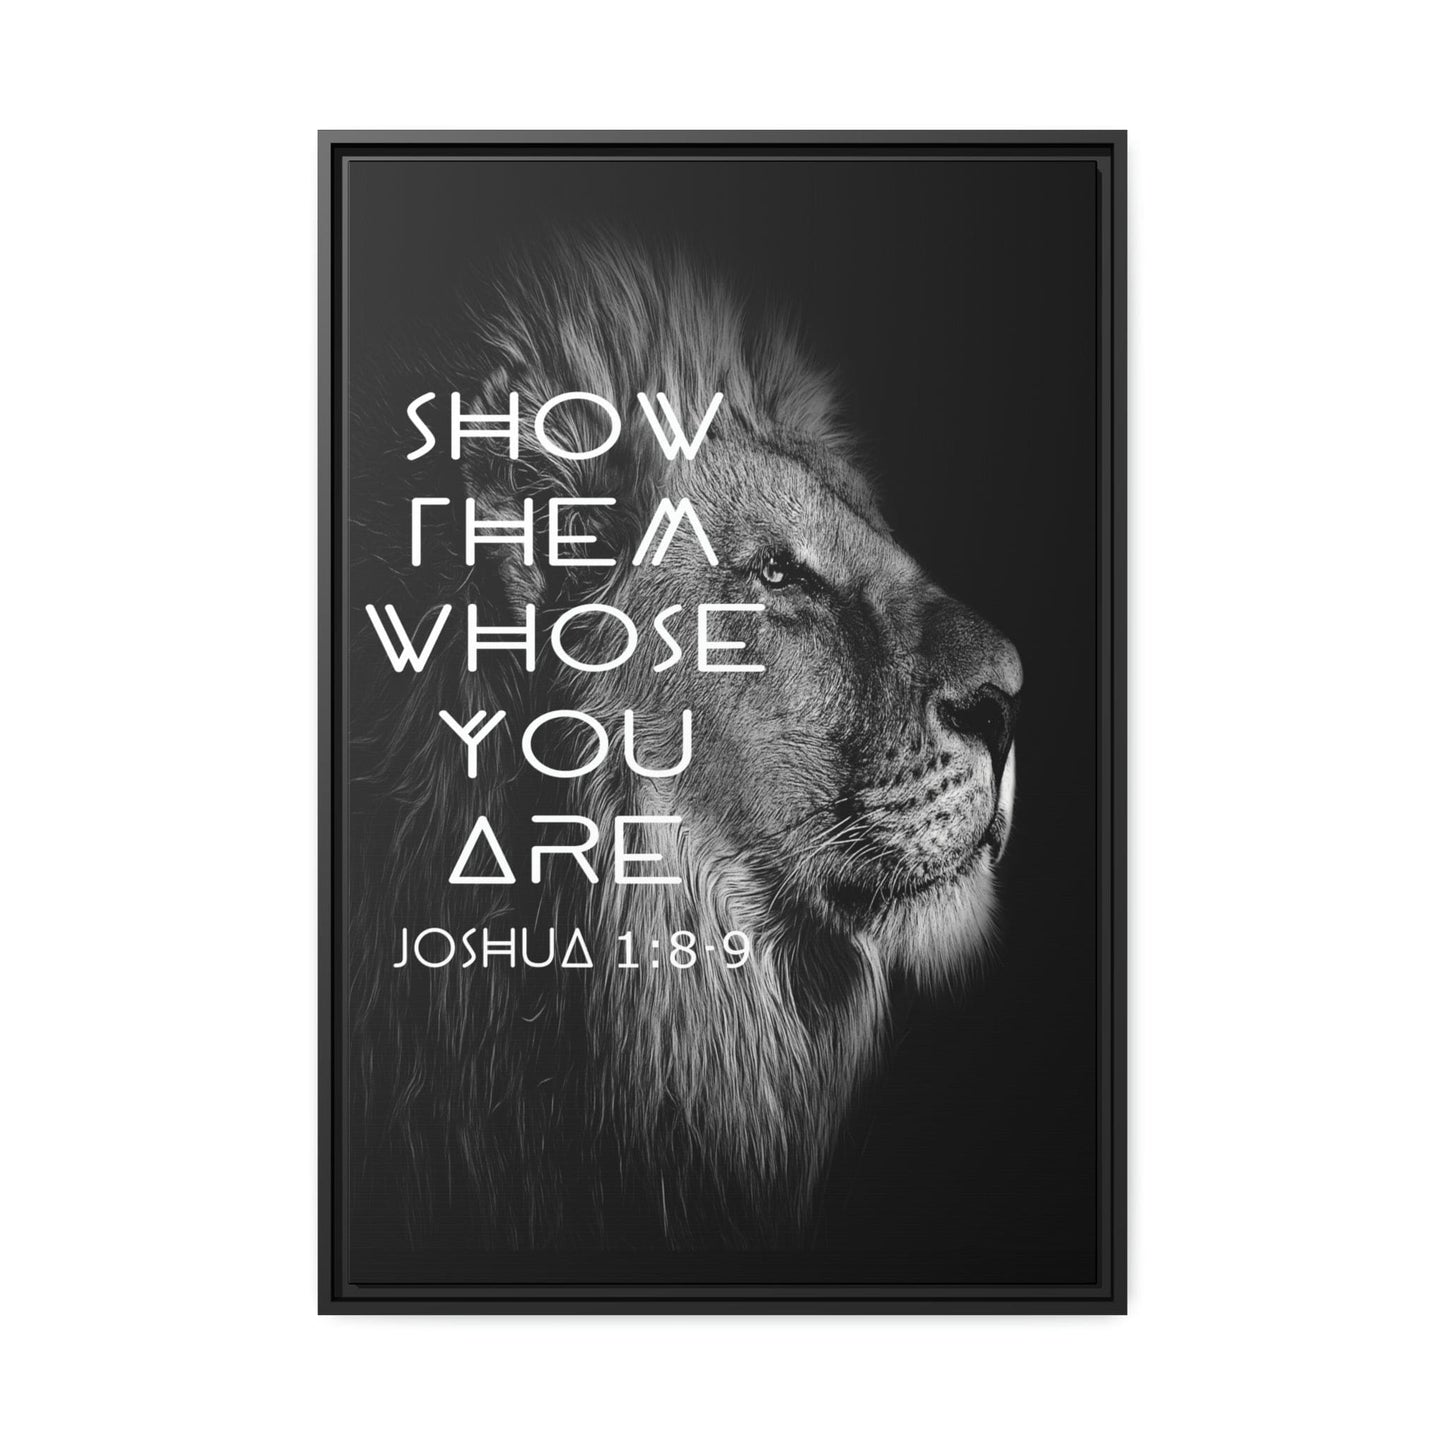 Printify Canvas 24″ x 36″ (Vertical) / Black / 1.25" Show Them Whose You Are - Joshua 1:8-9 Christian Canvas Wall Art